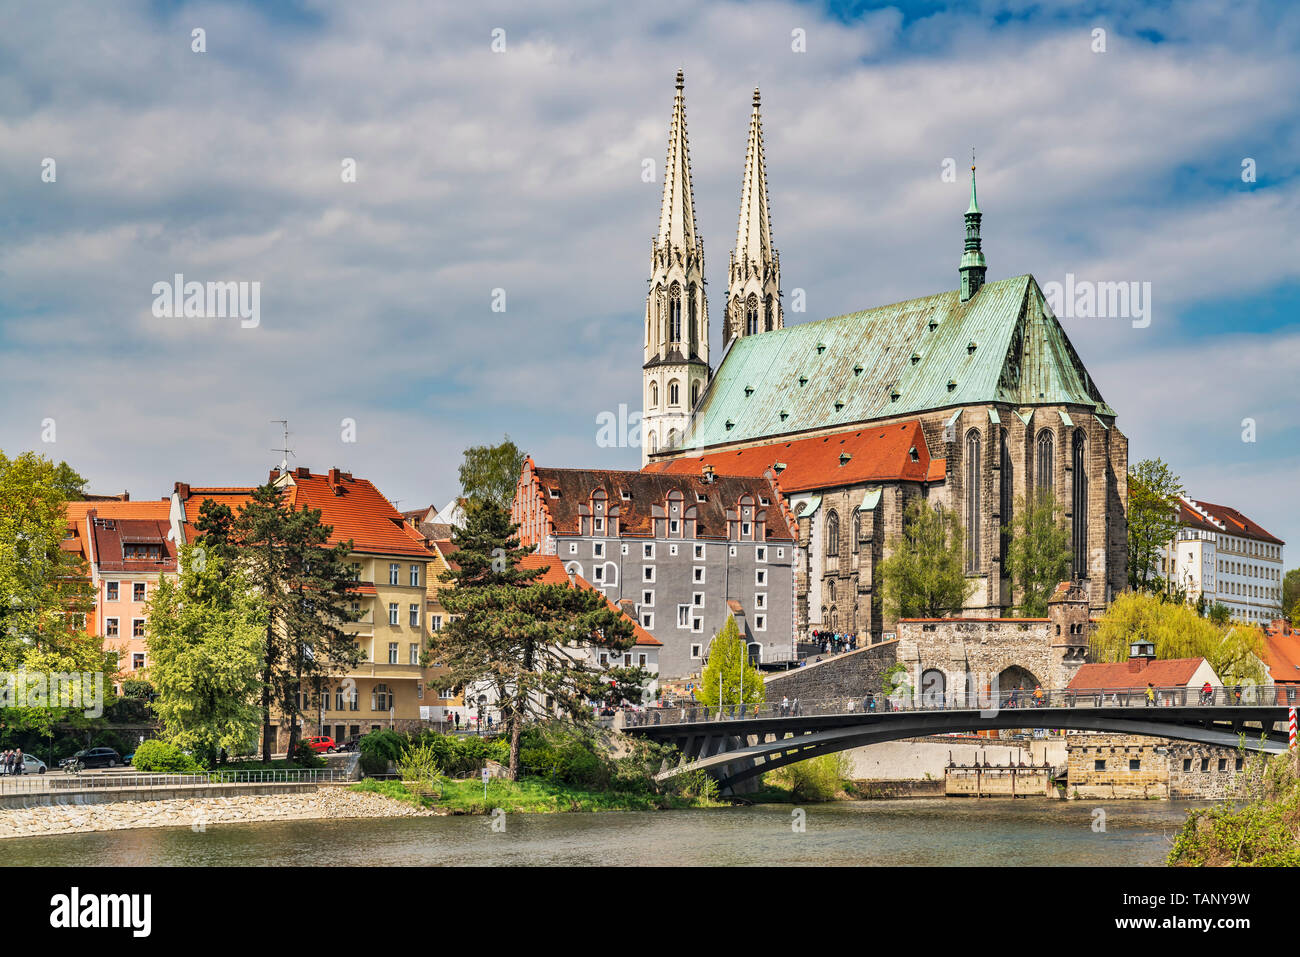 View over the river Neisse to the old town of Goerlitz and the Peterskirche (St. Peters Church), Goerlitz, Saxony, Germany, Europe Stock Photo